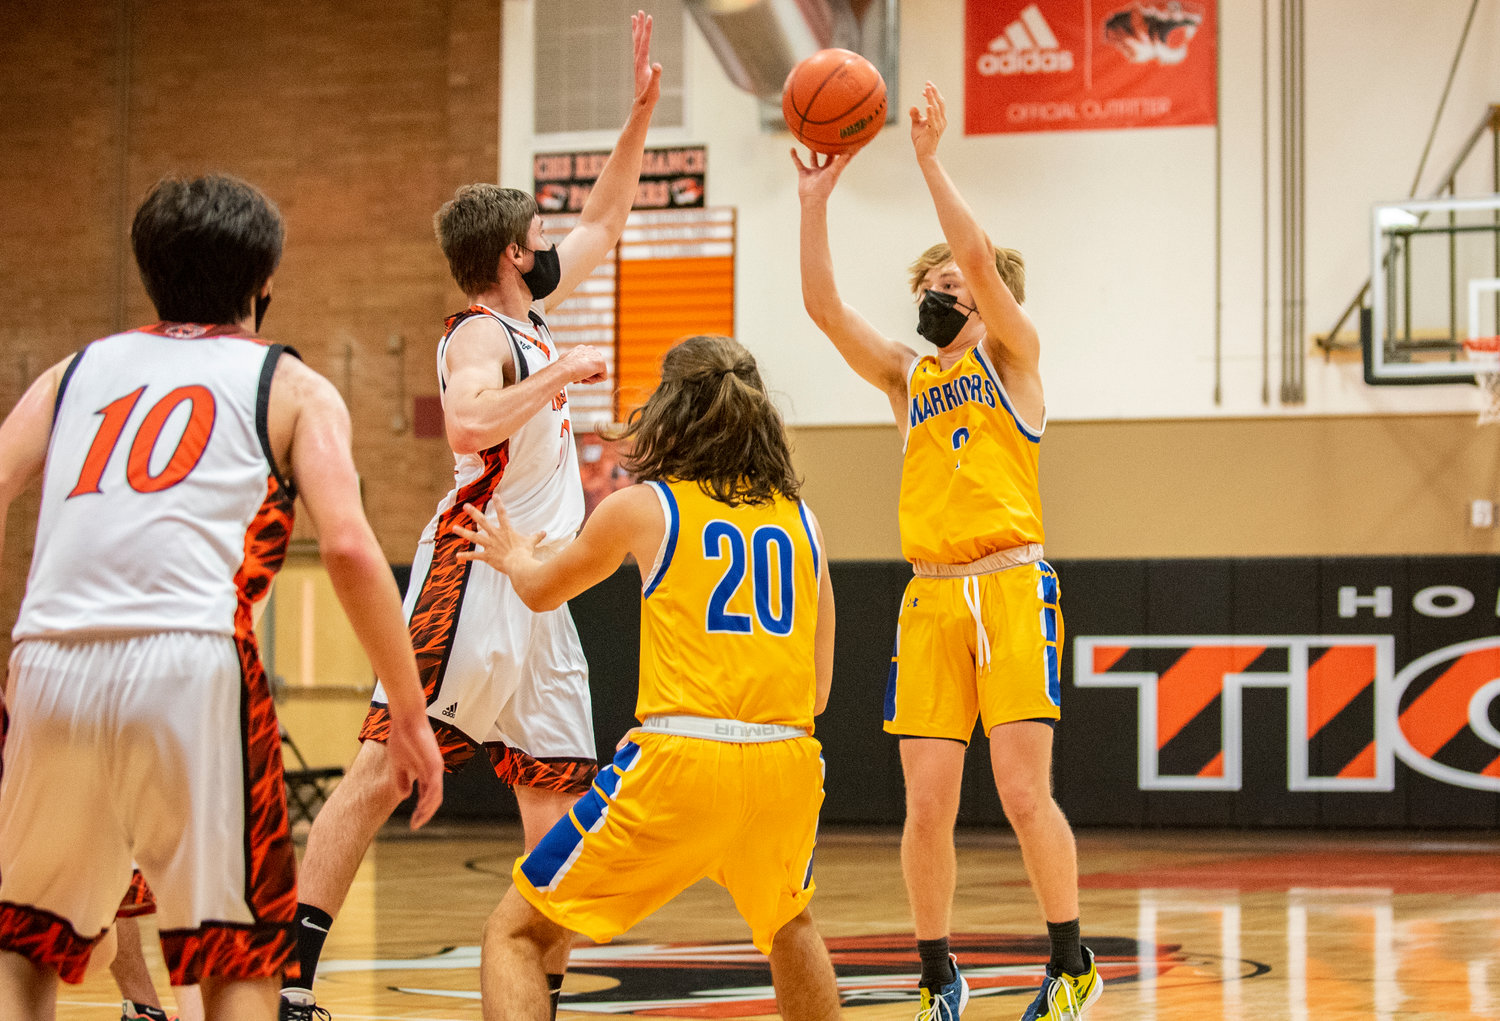 Rochester's Ben Crouse (2) shoots a 3-pointer over Centralia's Rex Akins on Wednesday.